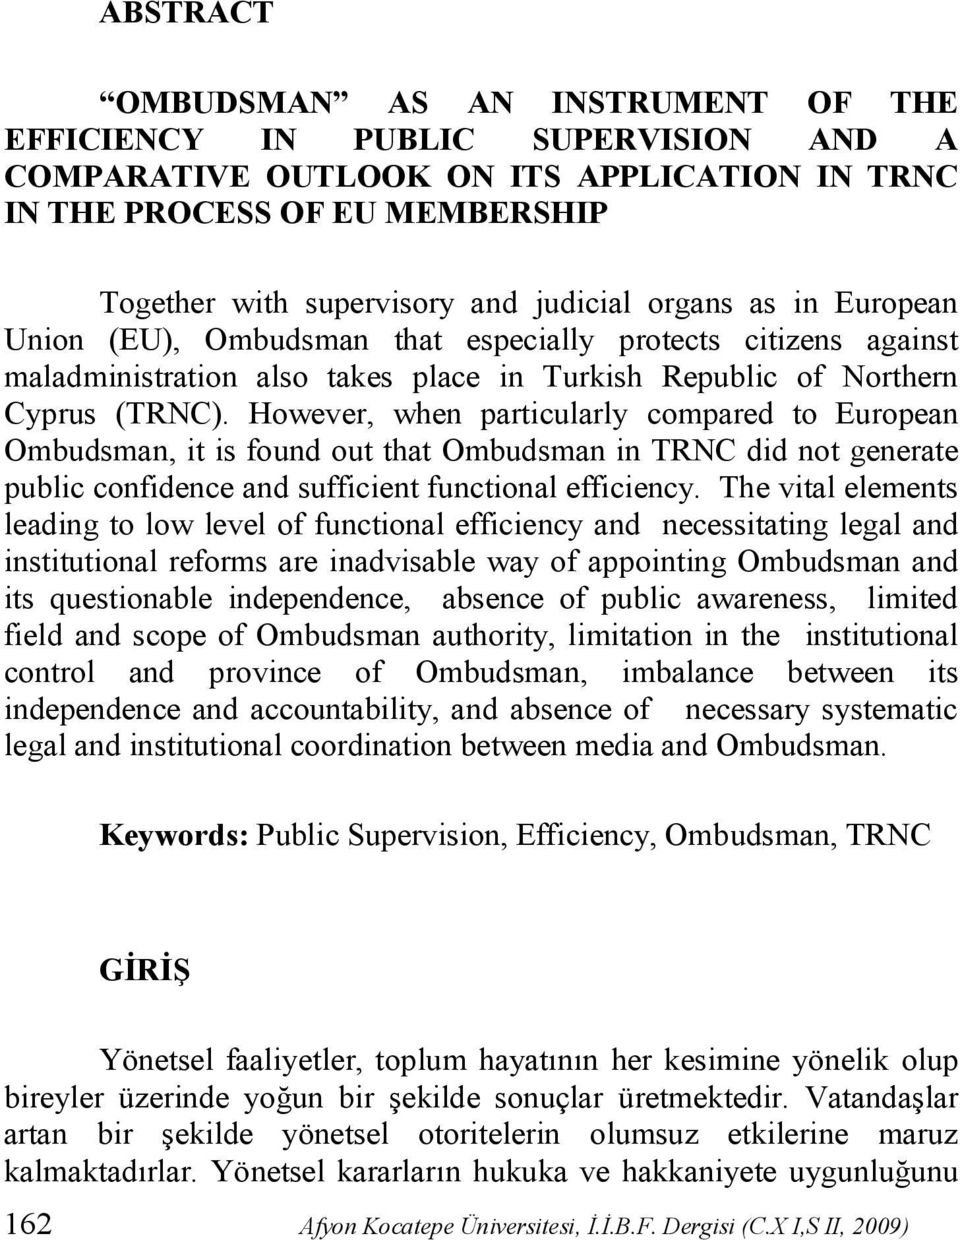 However, when particularly compared to European Ombudsman, it is found out that Ombudsman in TRNC did not generate public confidence and sufficient functional efficiency.